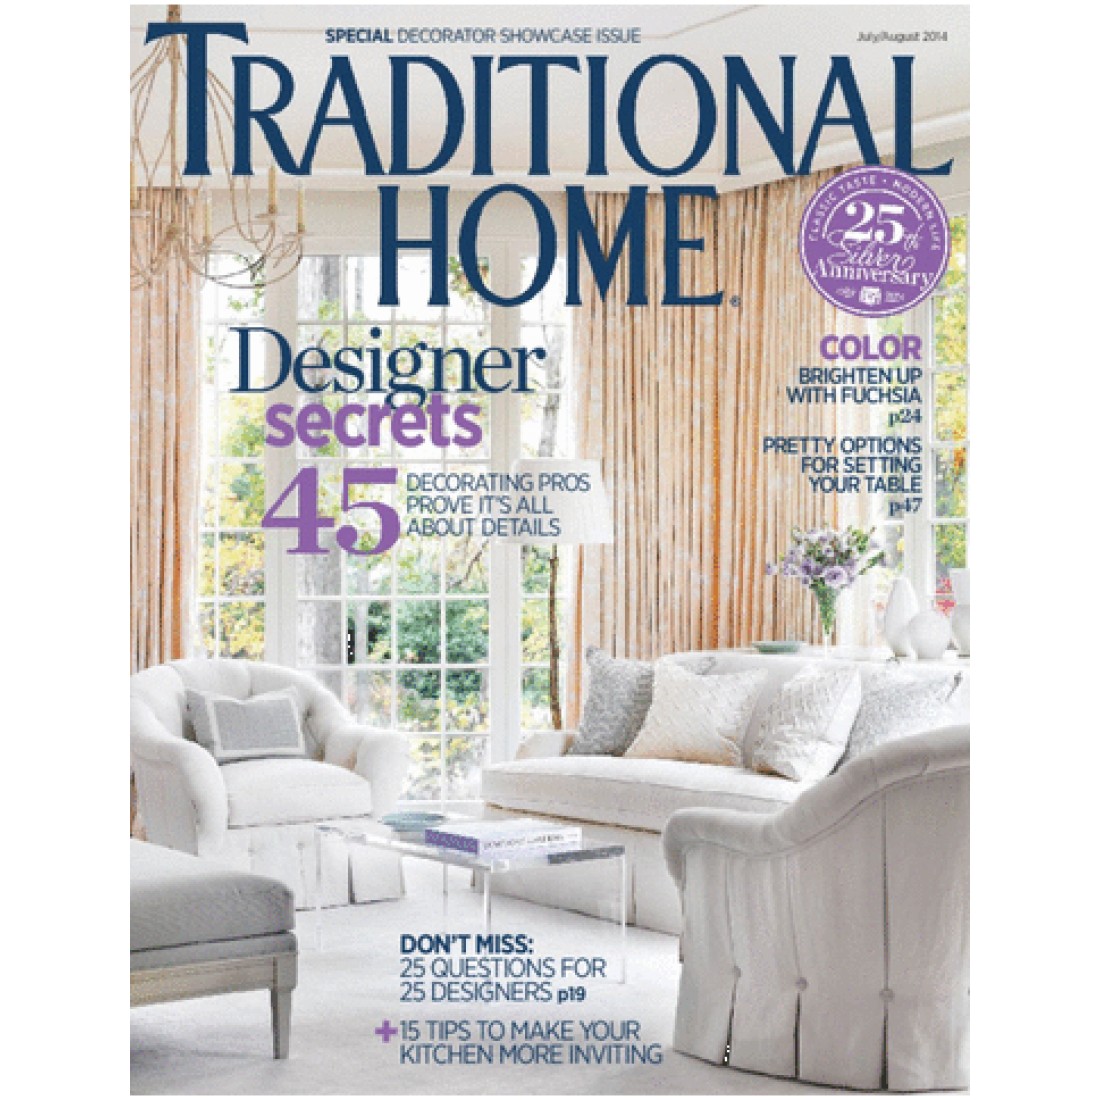 Traditional Home Magazine Subscriber Services